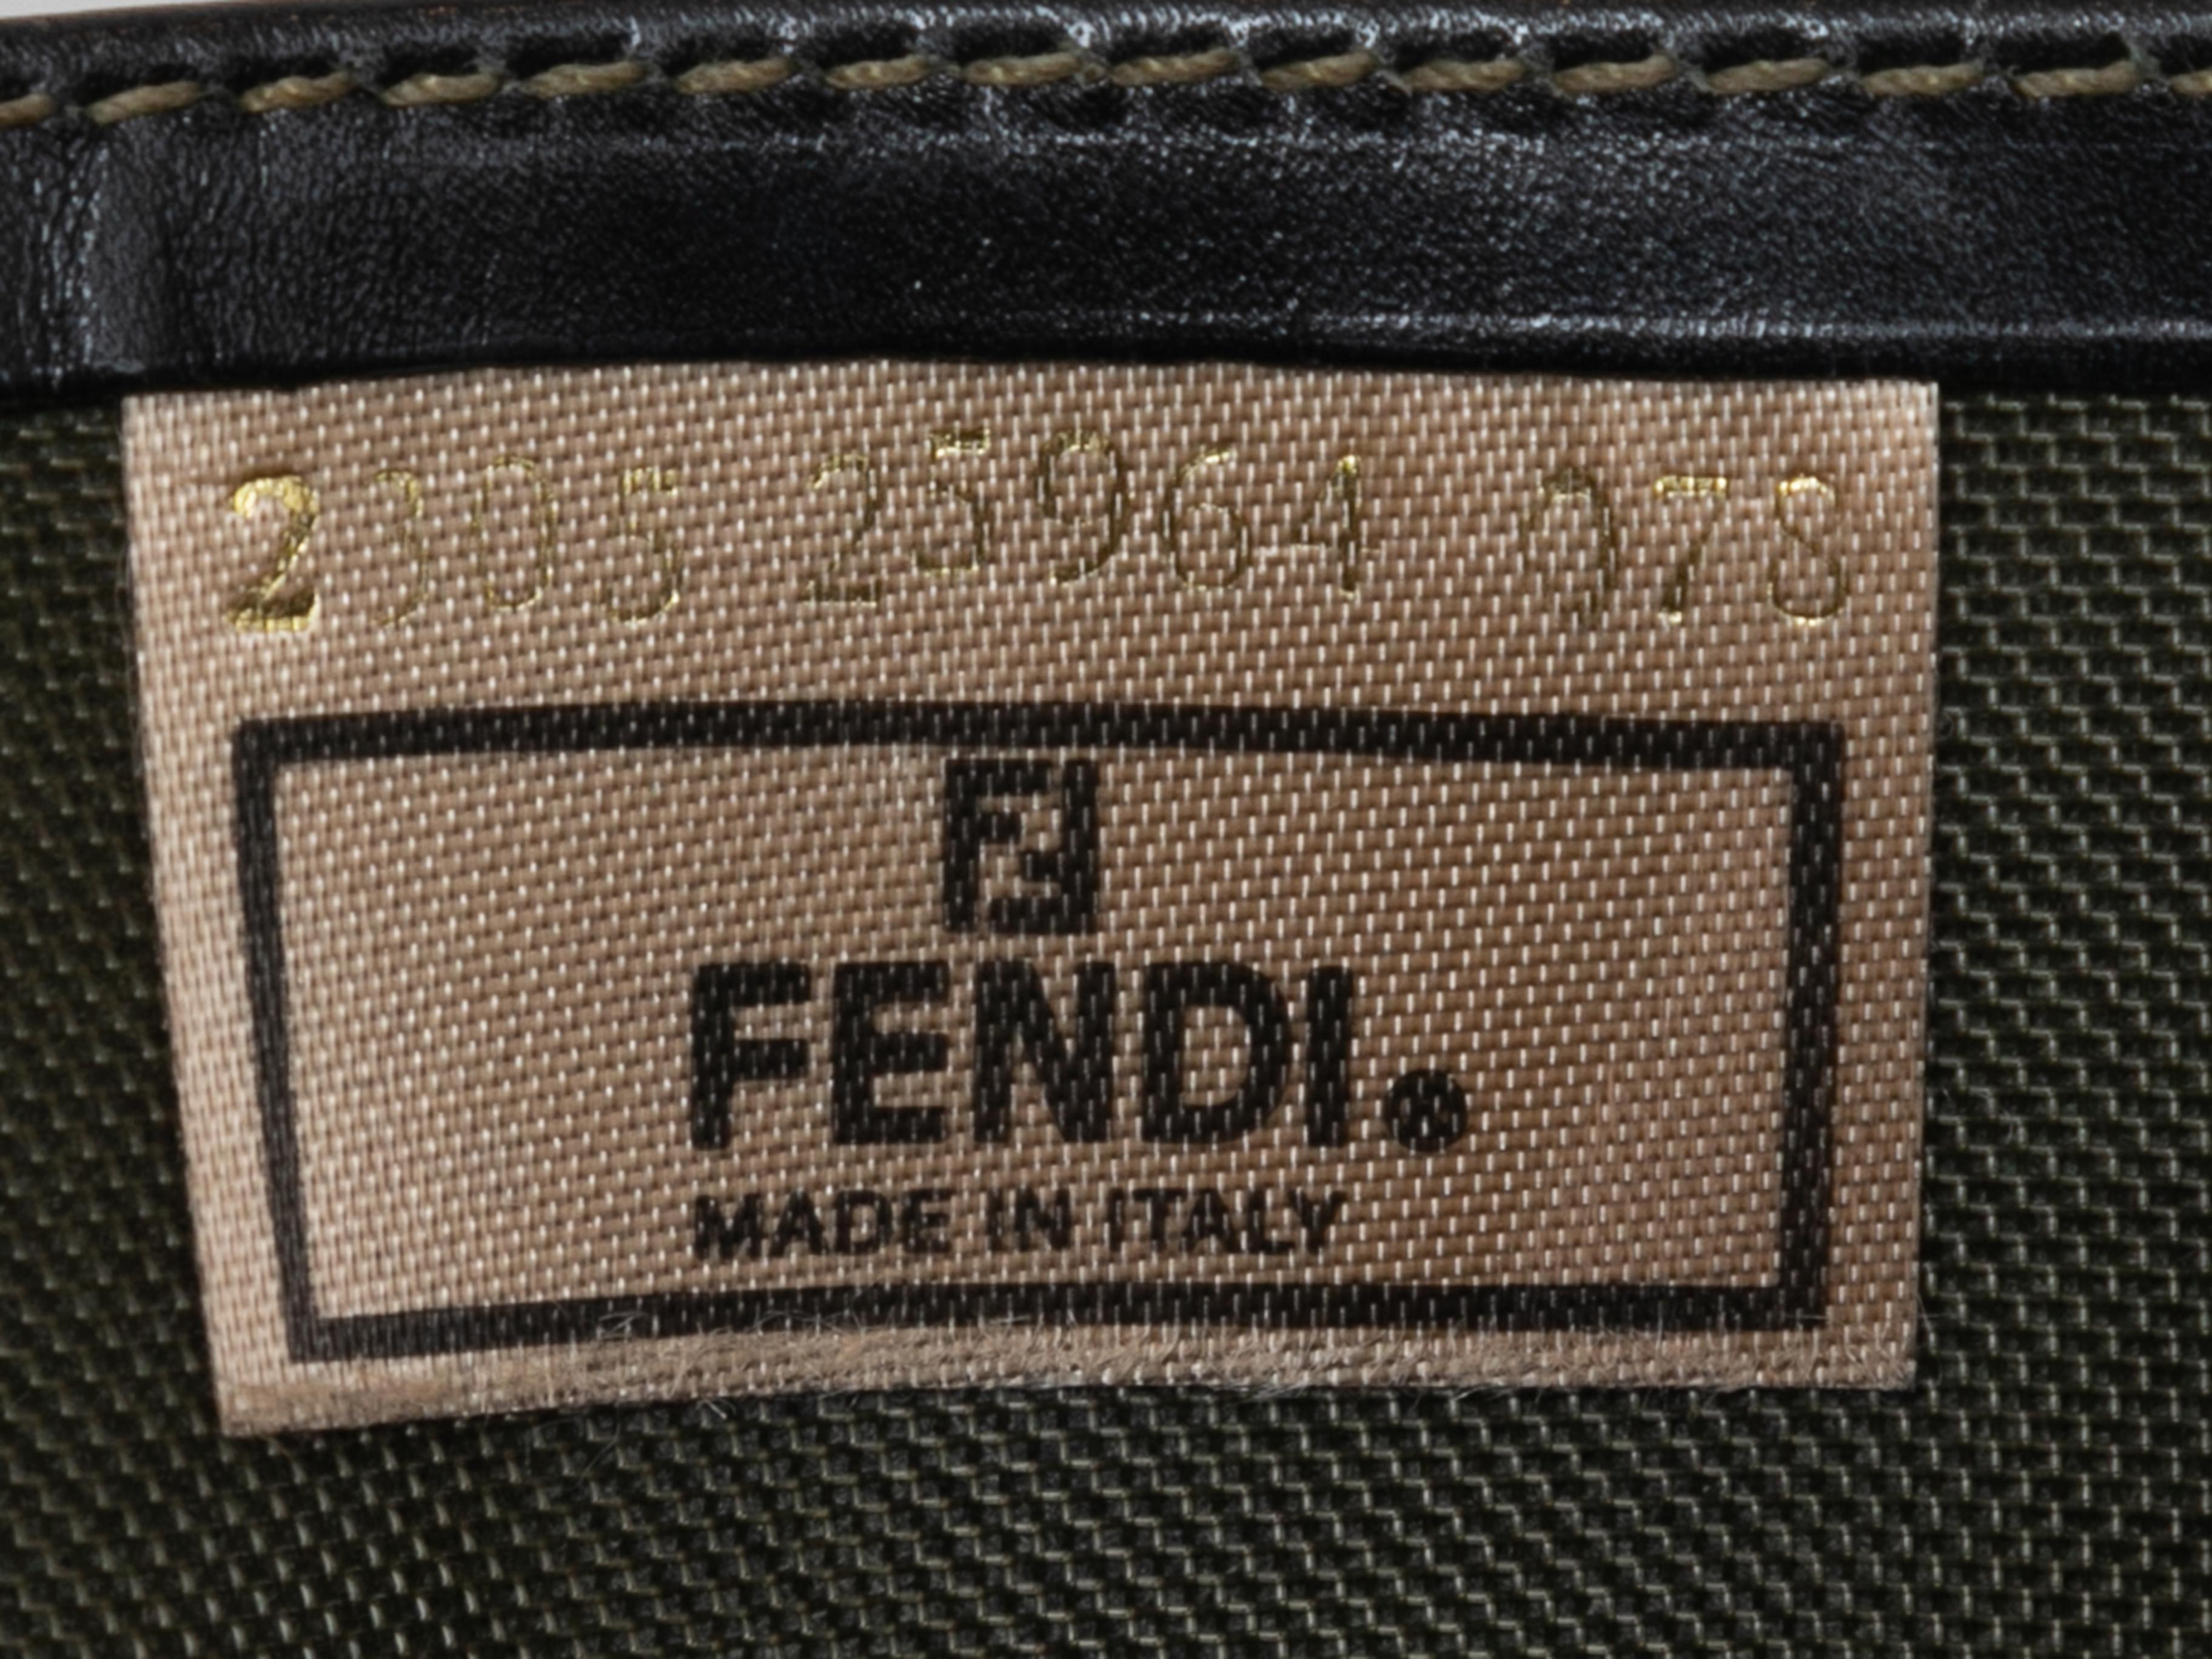 Vintage Black & Gold Fendi Mesh & Leather Tote Bag In Good Condition For Sale In New York, NY